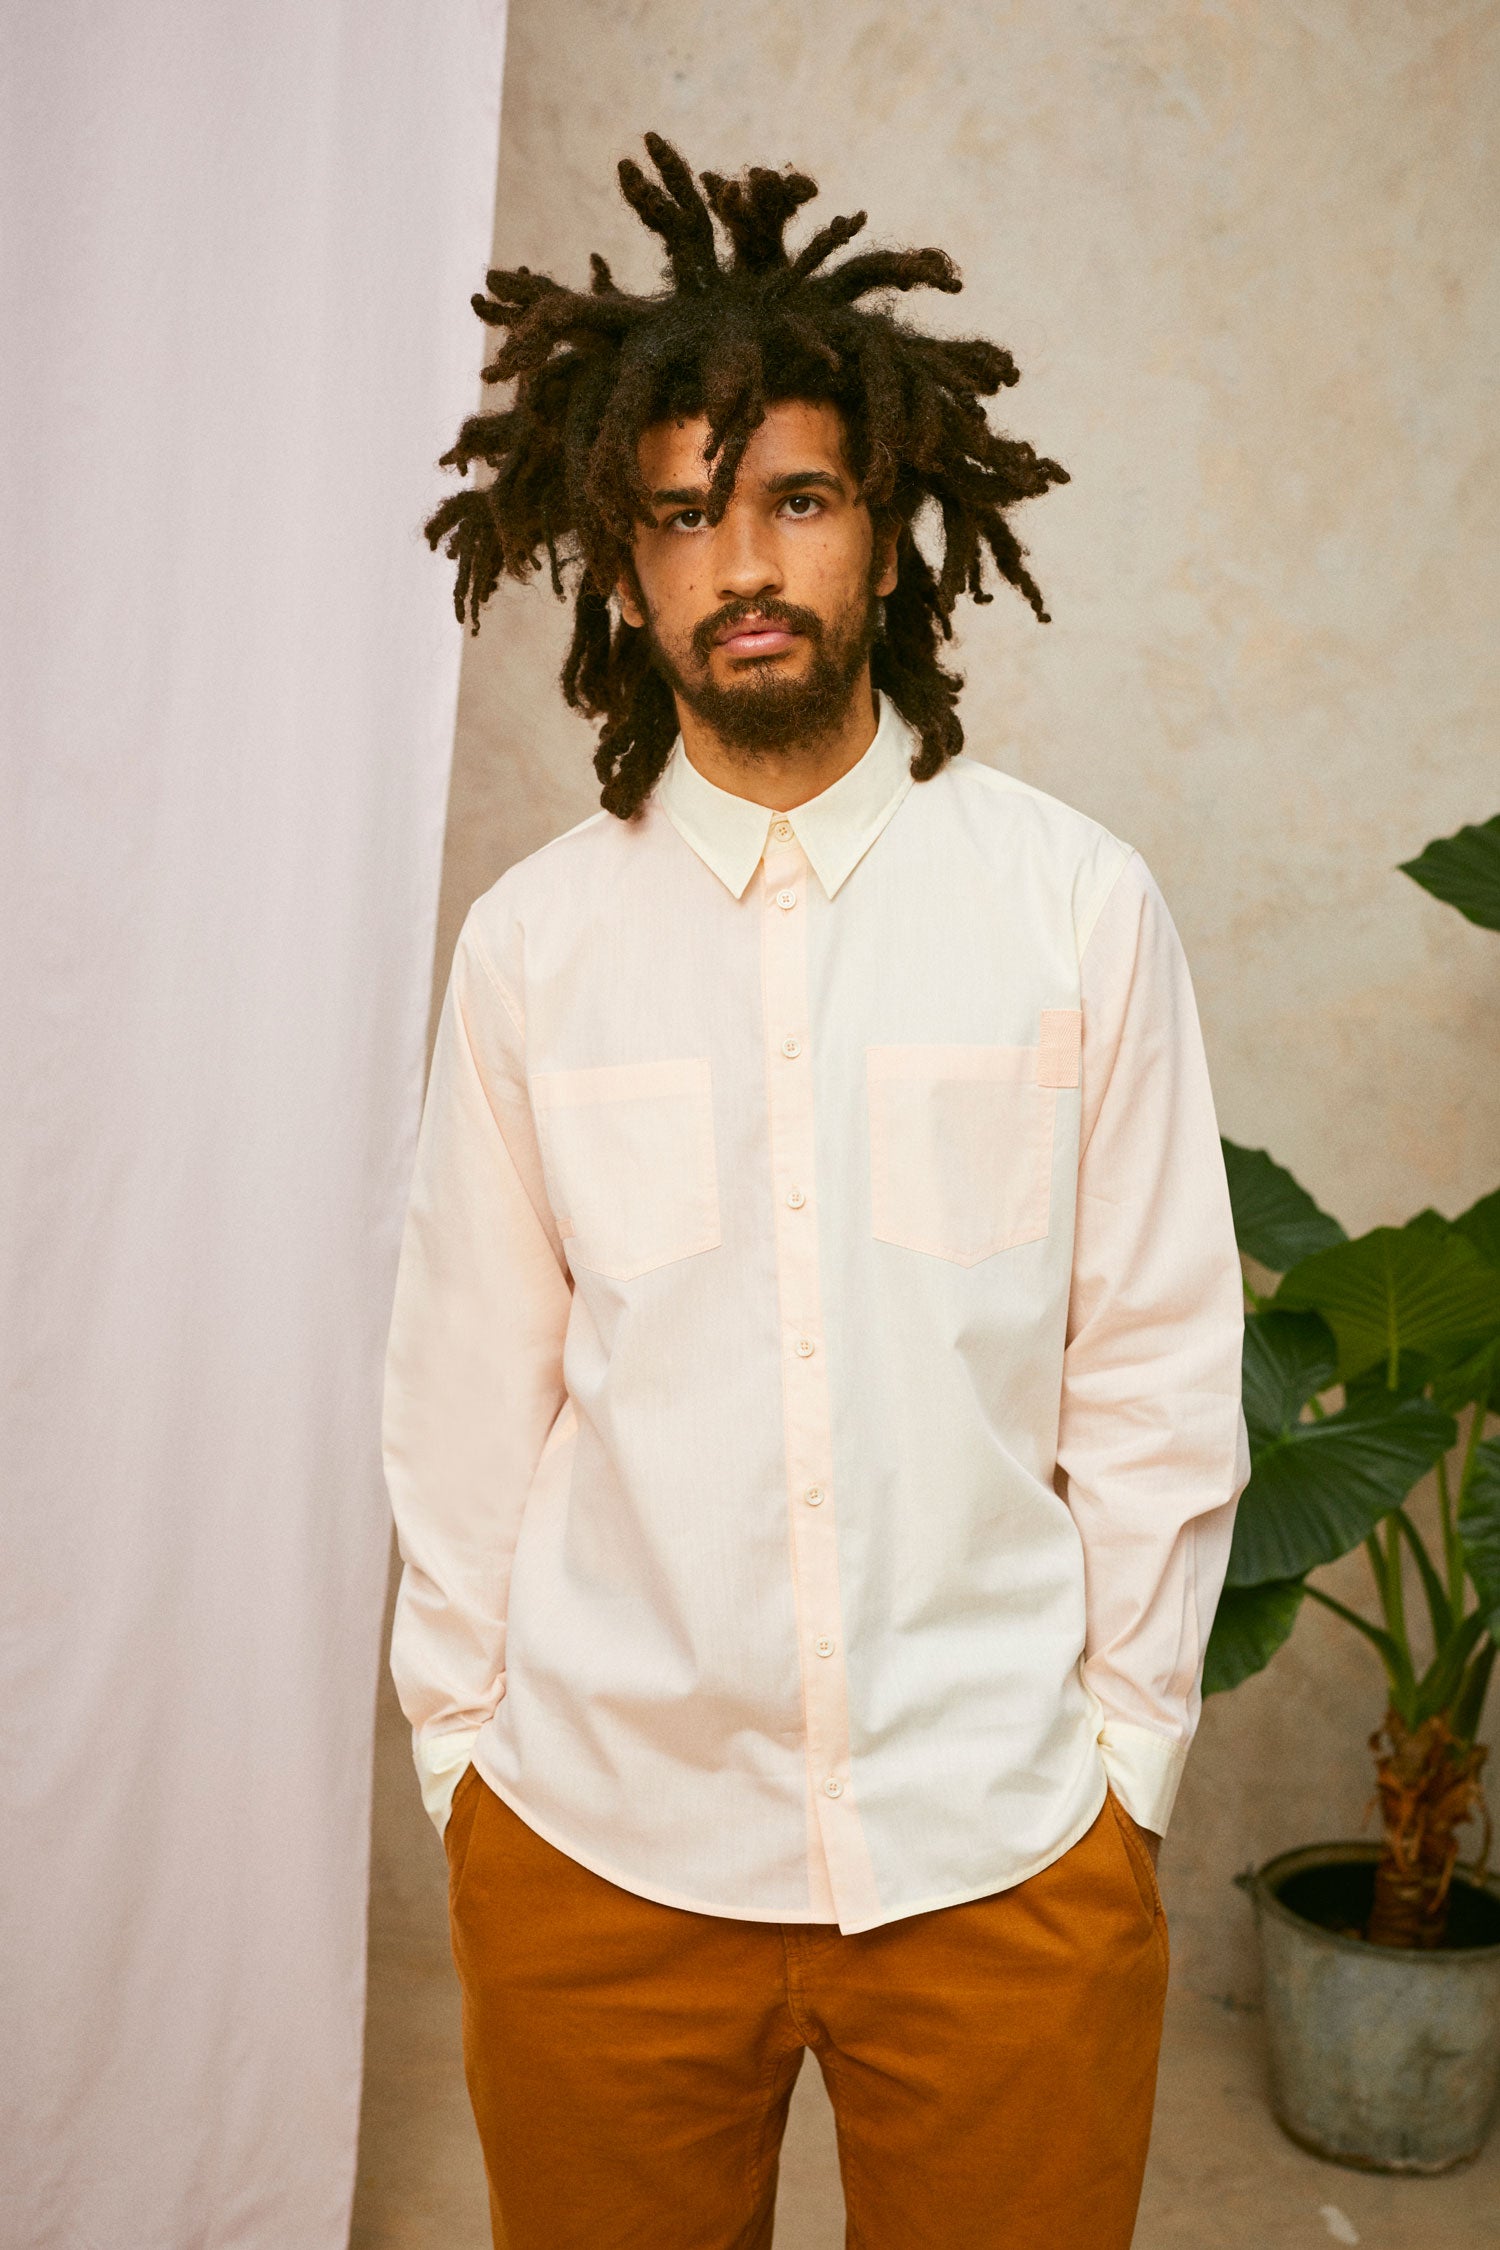 Model wears Saywood's Eddy Mens mens patchwork Shirt with patch pockets in orange and yellow. Worn with tabacco trousers. Model has both hands in his trouser pocket and a plant and drop of pink fabric can be seen in the background.